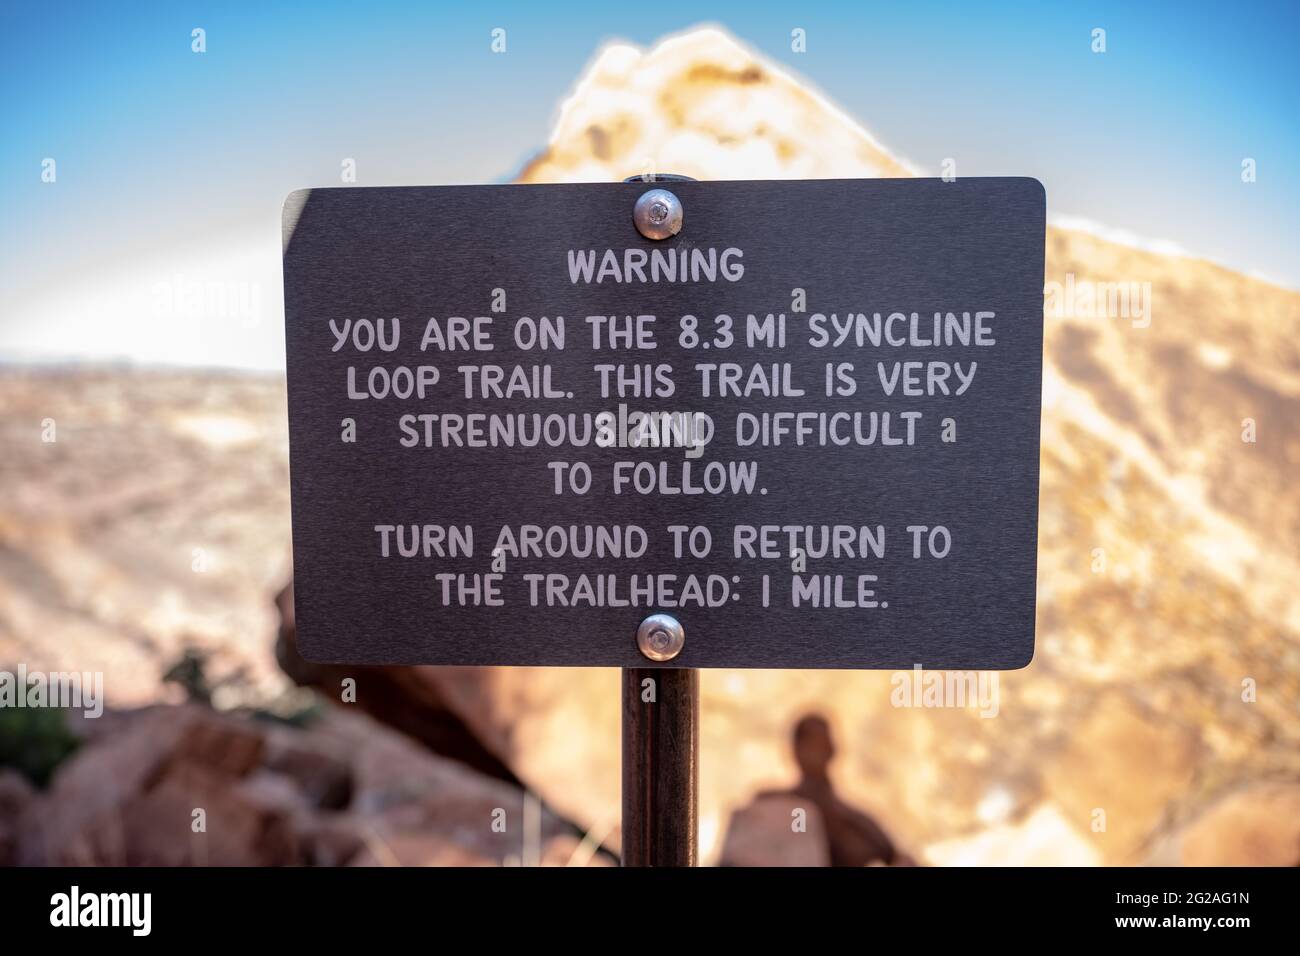 Warning Sign on Syncline Loop Trail in Canyonlands National Park Stock Photo